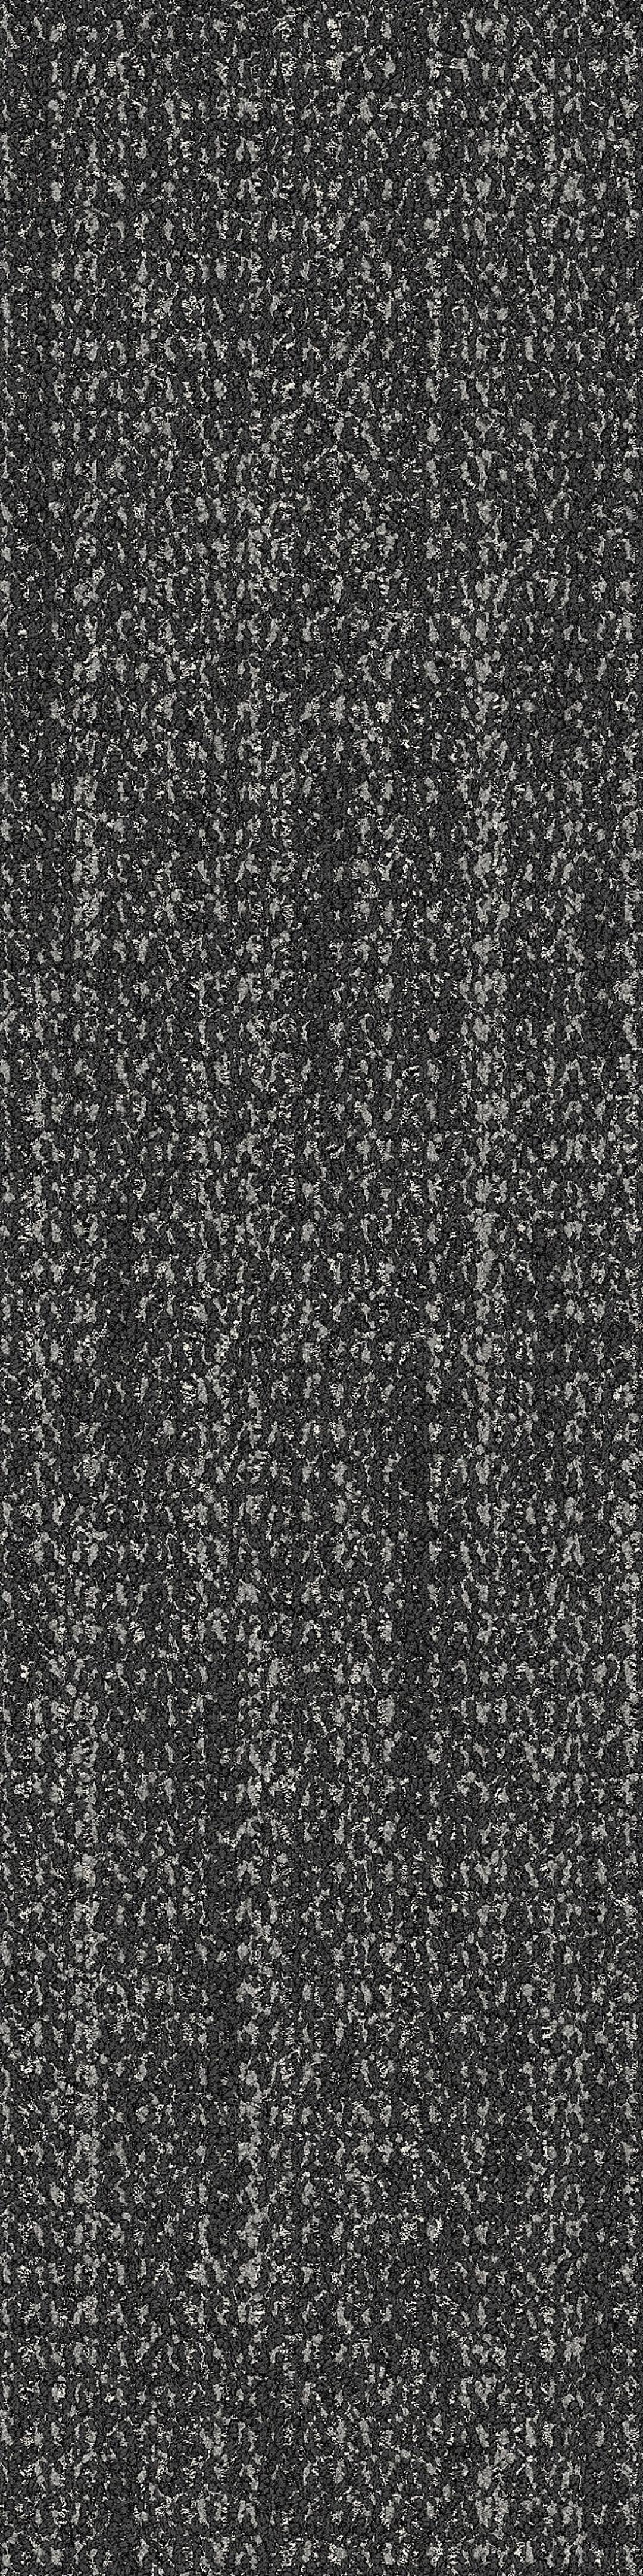 World Woven - WW870 - Black Weft from Inzide